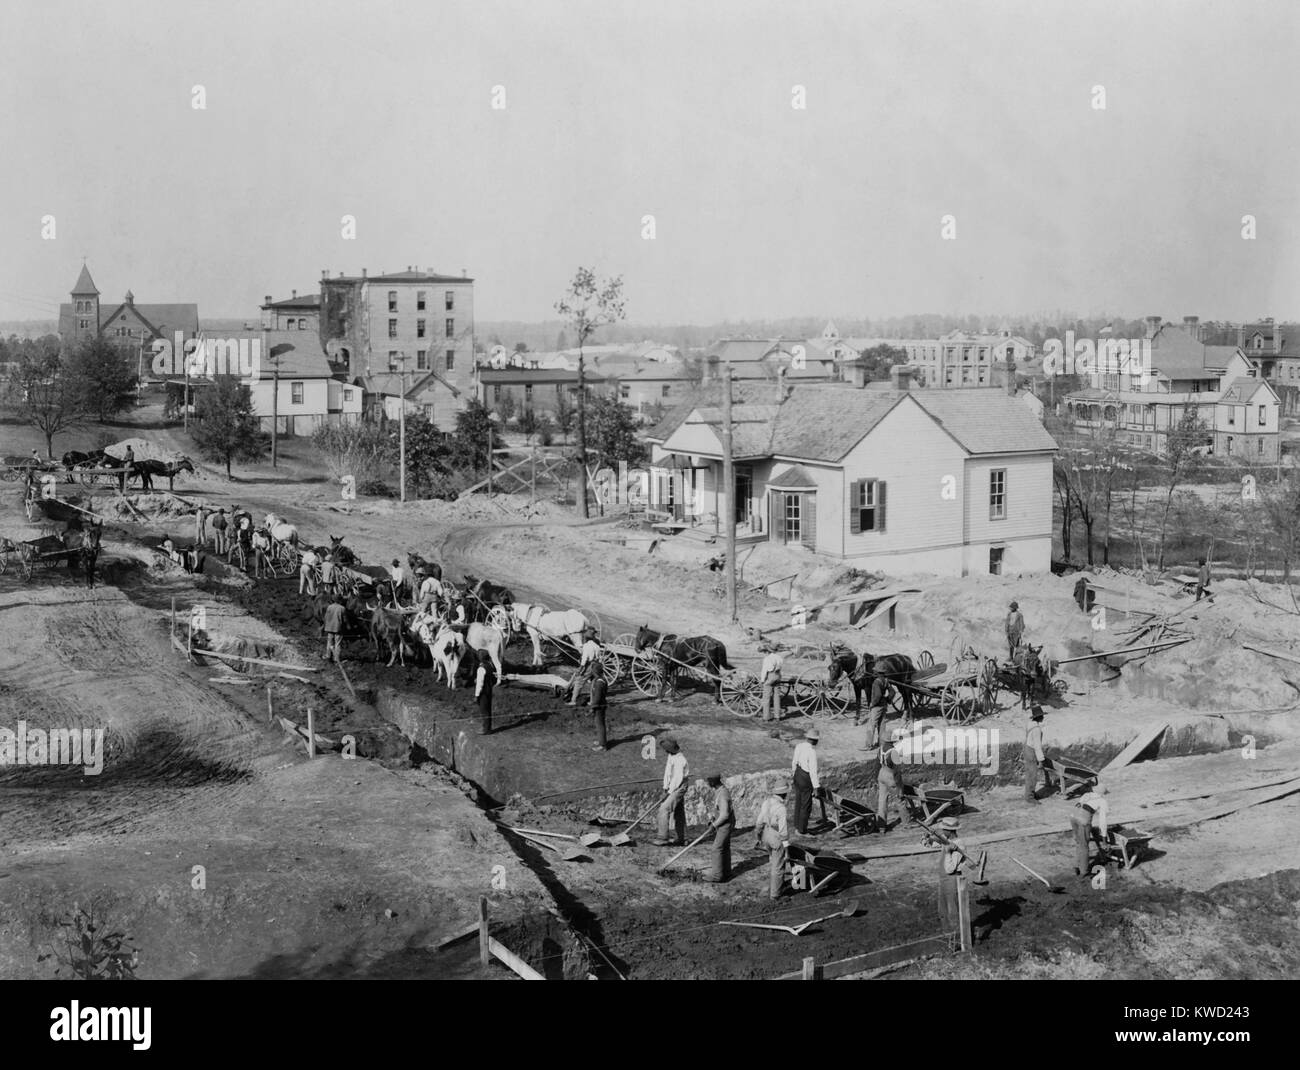 Tuskegee Institute students digging the foundations for Collis P. Huntington Memorial building, 1902. While working, they learned construction trade skills and erected the college building at a modest cost of $50,000. Huntington was one of the American philanthropists that contributed to the African American college. Photo by Frances Benjamin Johnston  (BSLOC 2017 20 130) Stock Photo